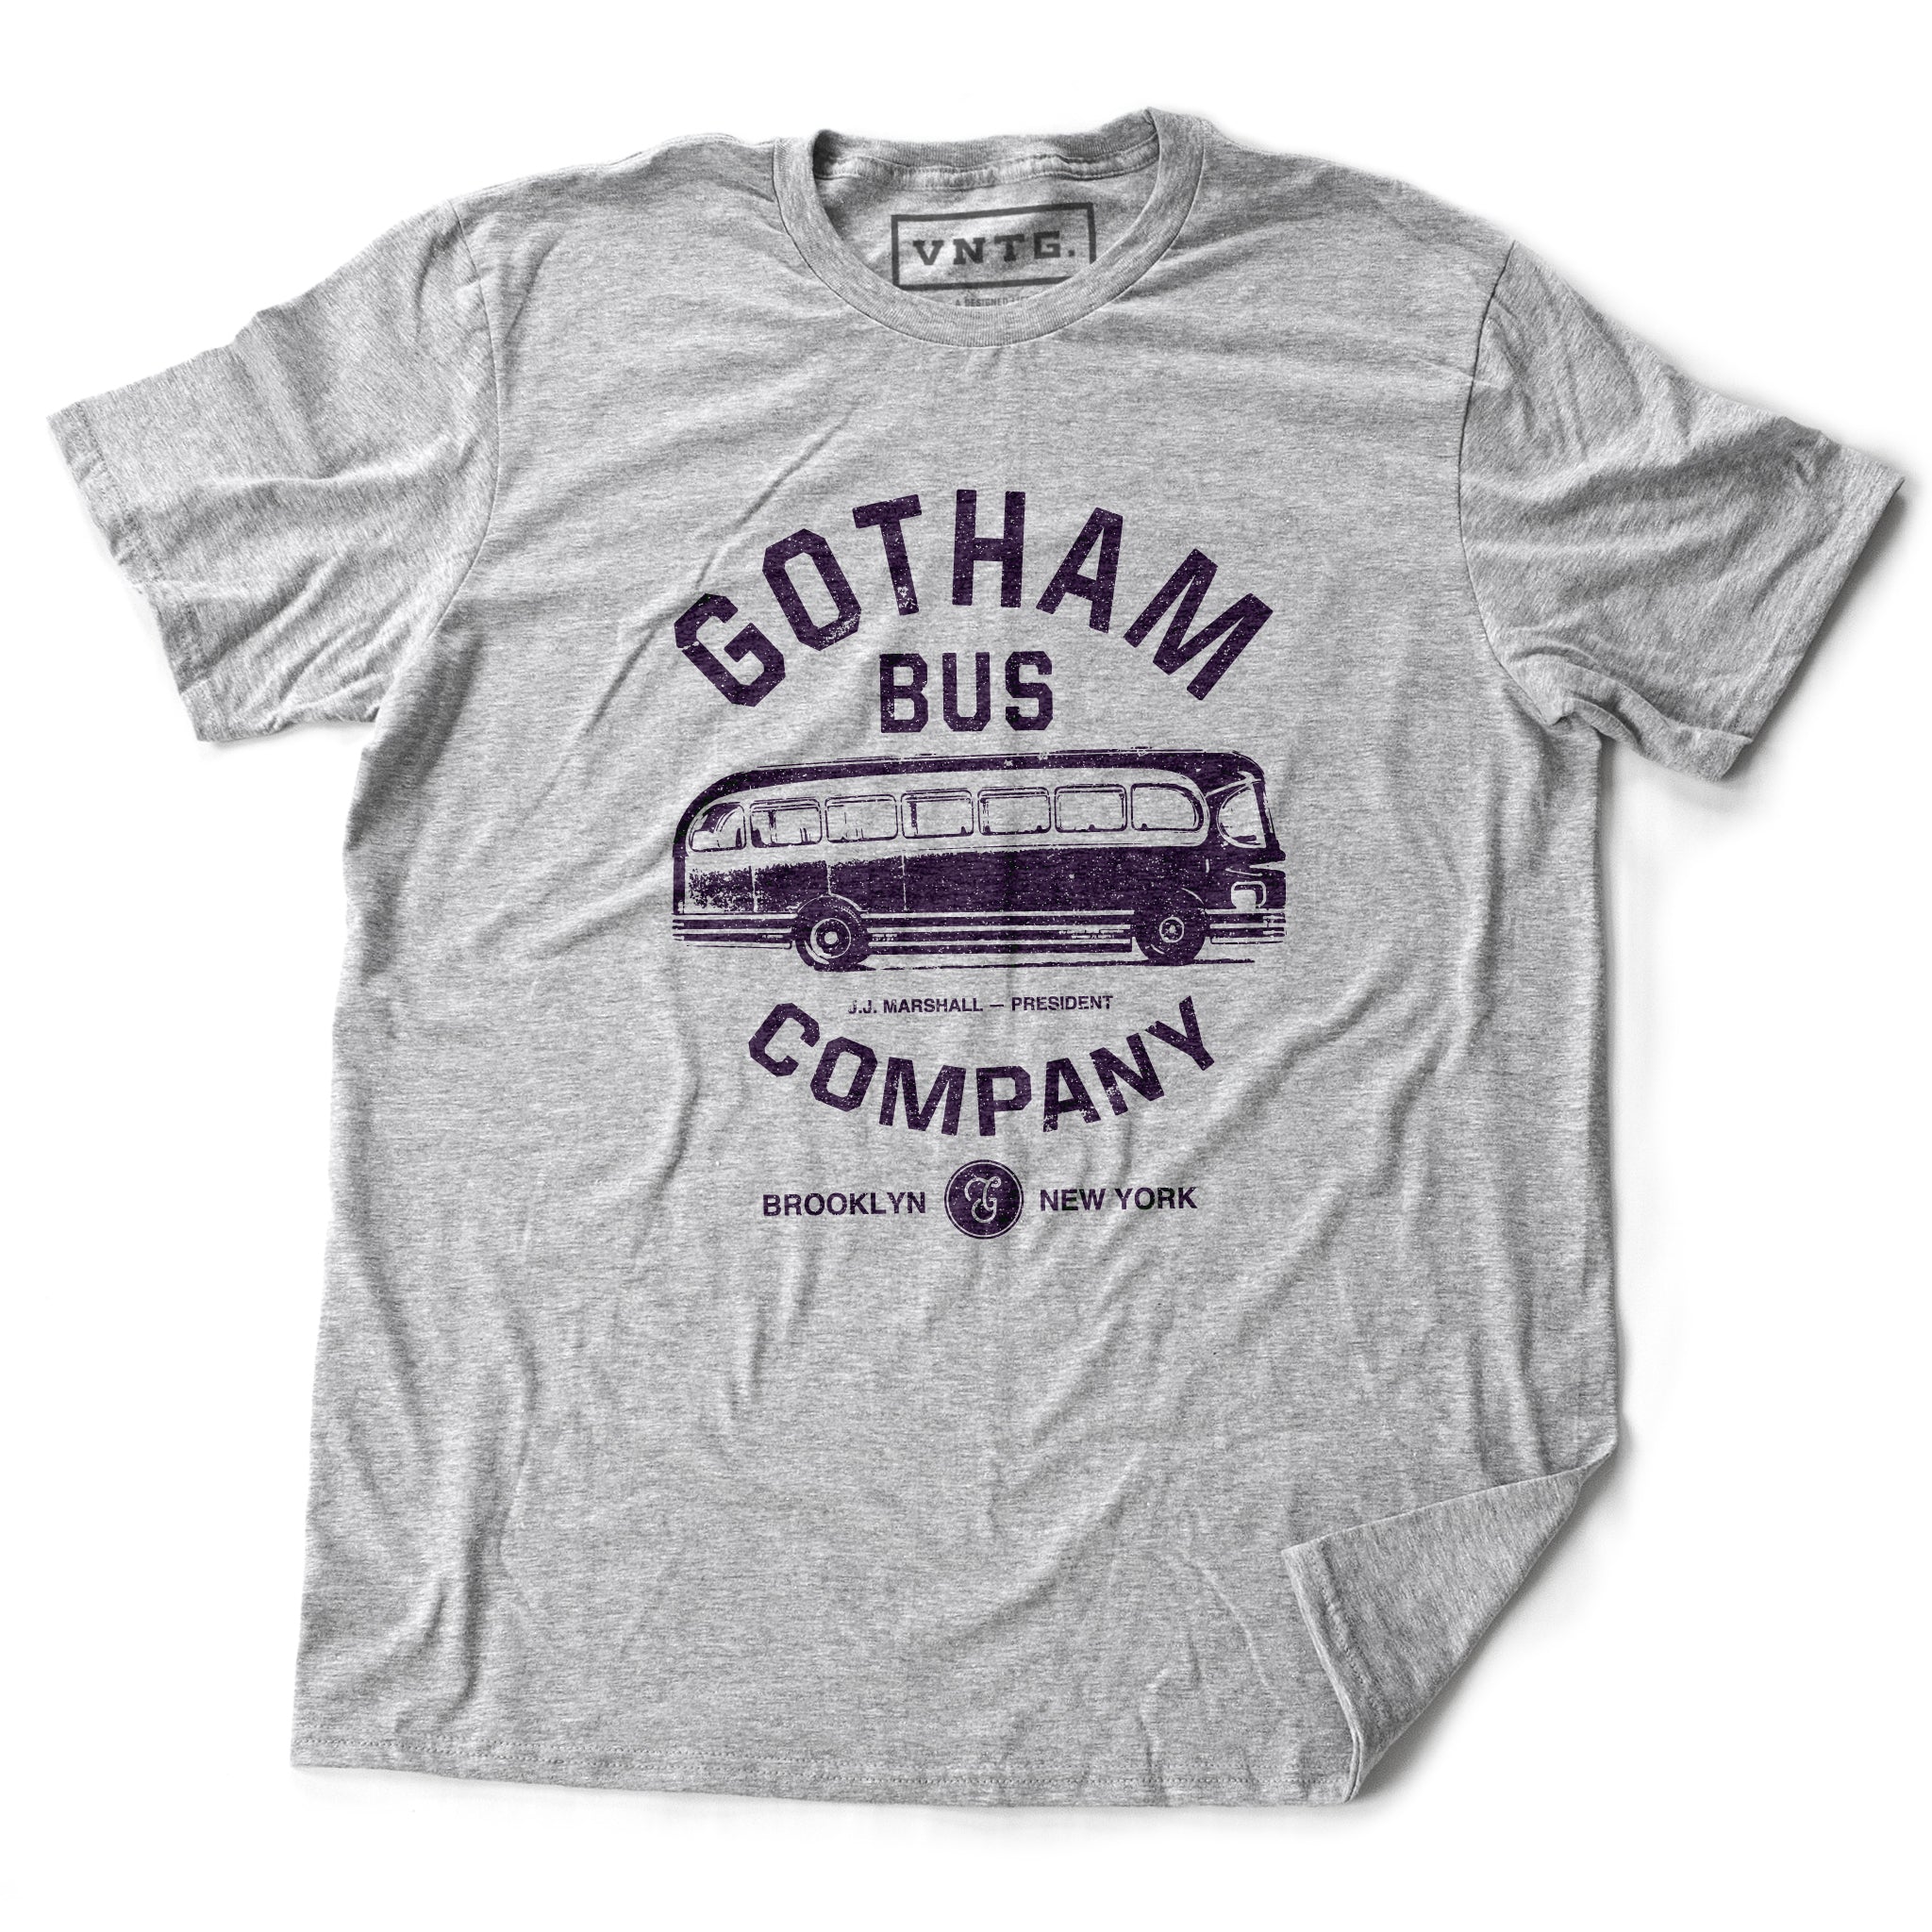 A retro t-shirt in Athletic Heather Gray, inspired by The Honeymooners, a 1950s Classic tv show featuring Jackie Gleason as Ralph Kramden. This shirt is a fictional promotion of the show’s Gotham Bus Company and shows a graphic of an old bus. By fashion brand VNTG, available from wolfsaint.net